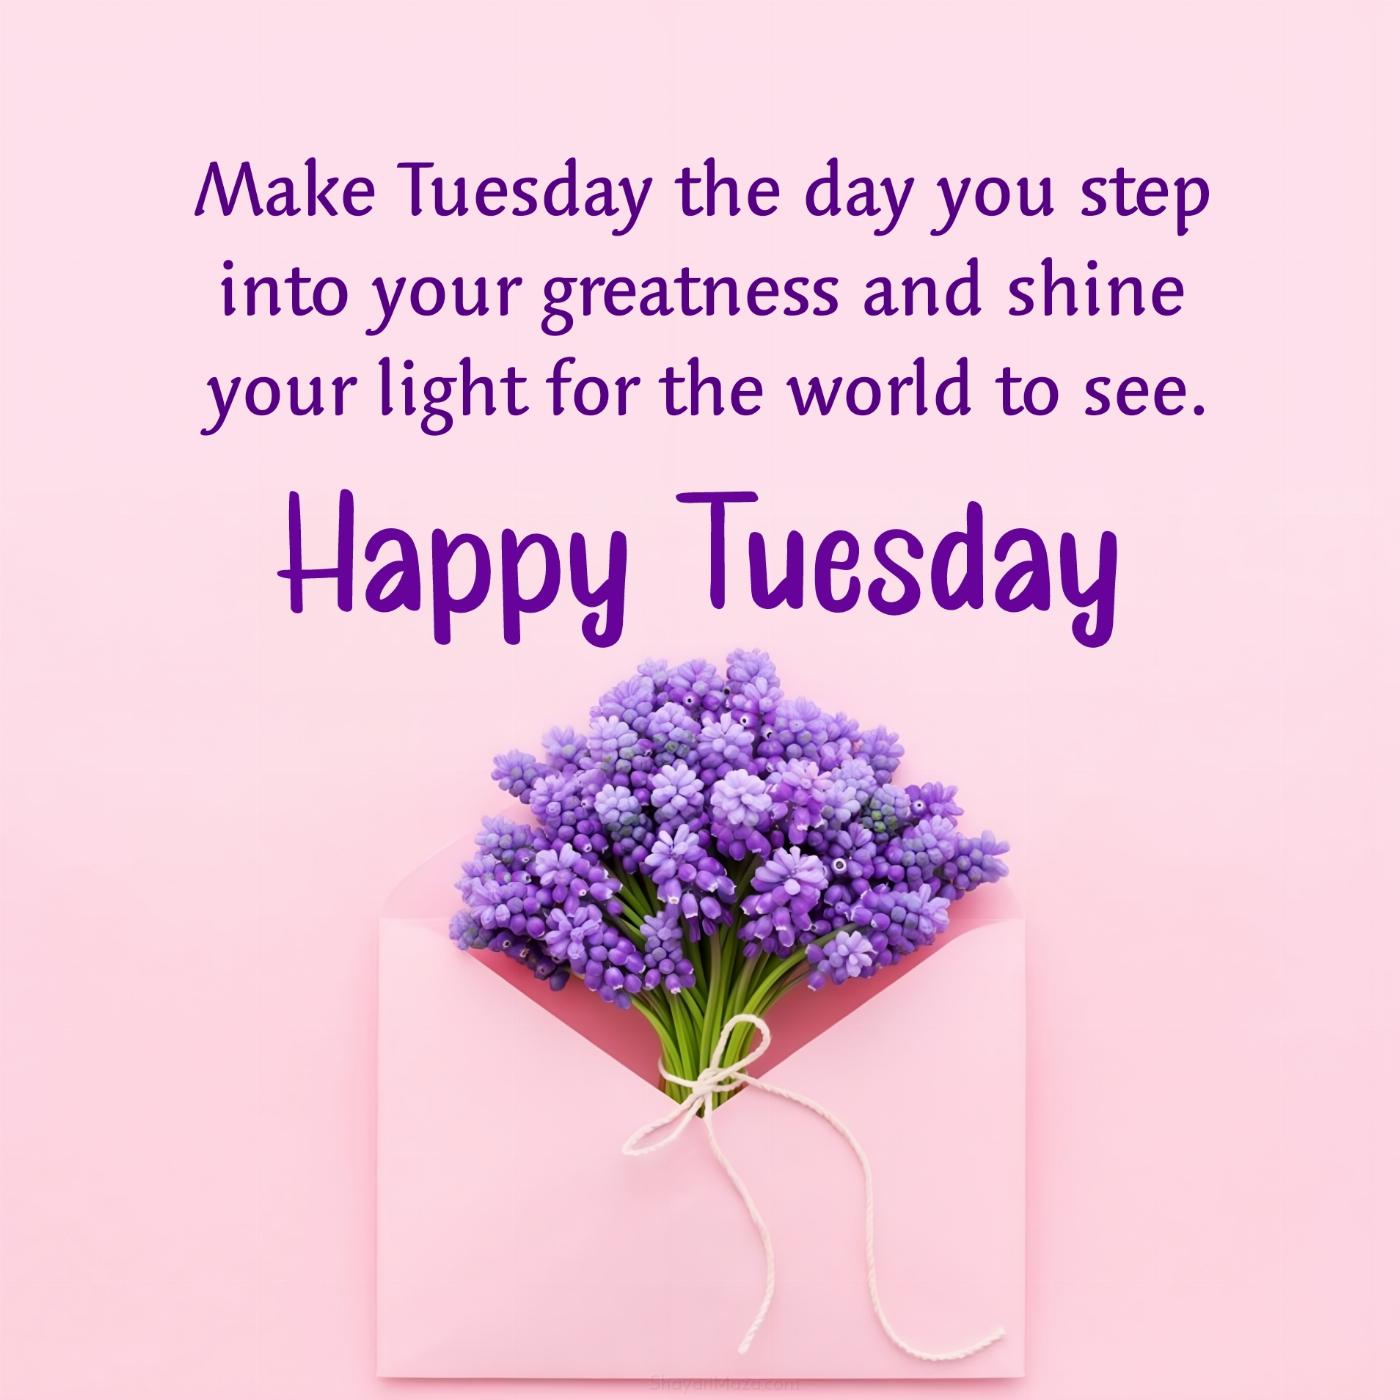 Make Tuesday the day you step into your greatness and shine your light